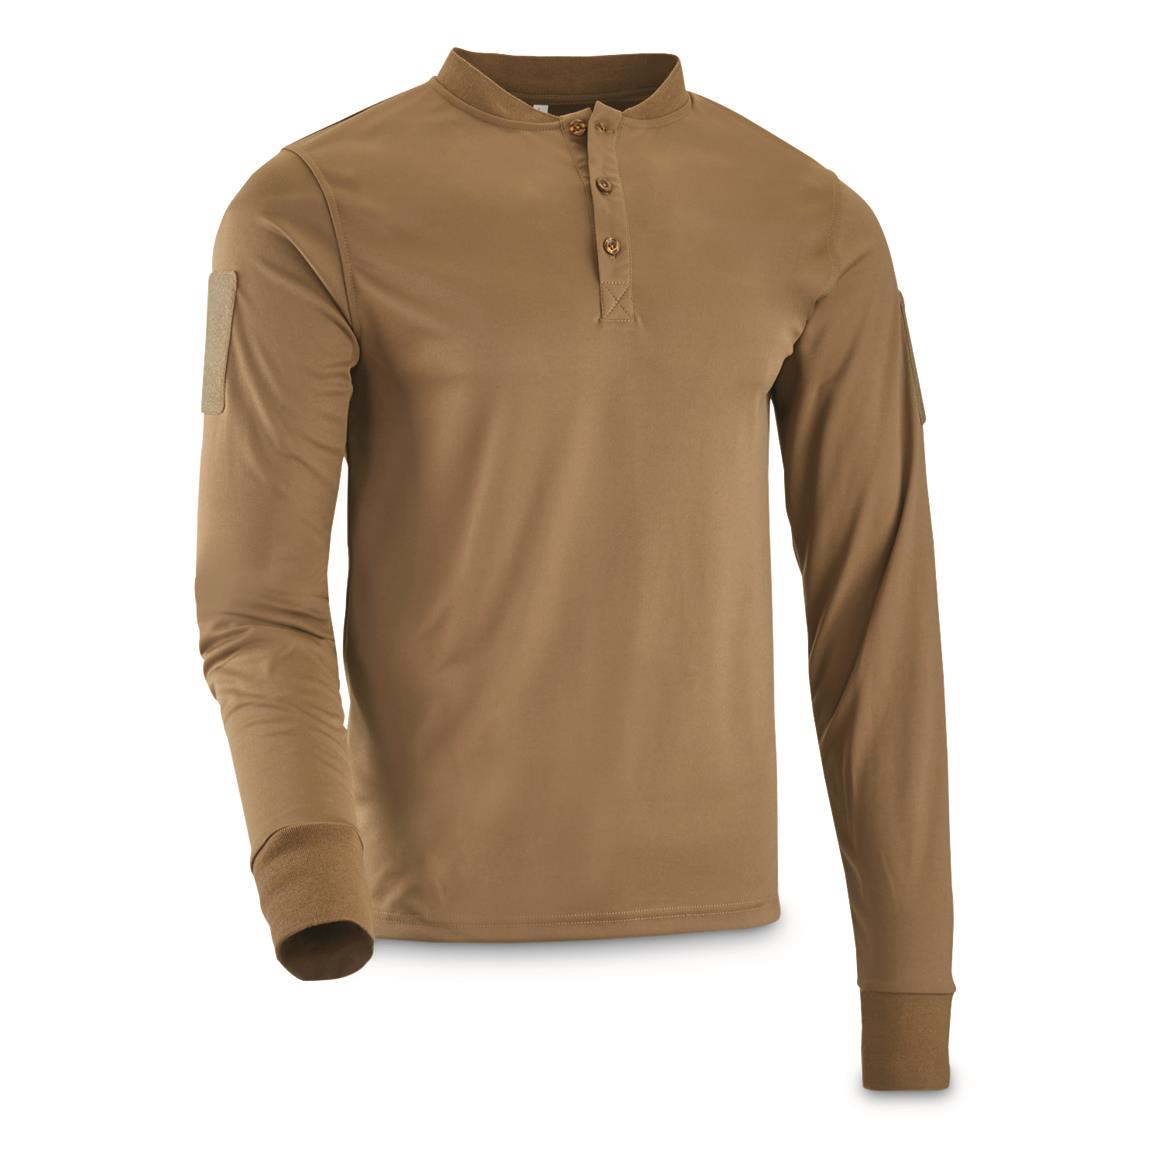 Brooklyn Armed Forces Wallace Beery Base Layer Henley Shirt, Tan 499